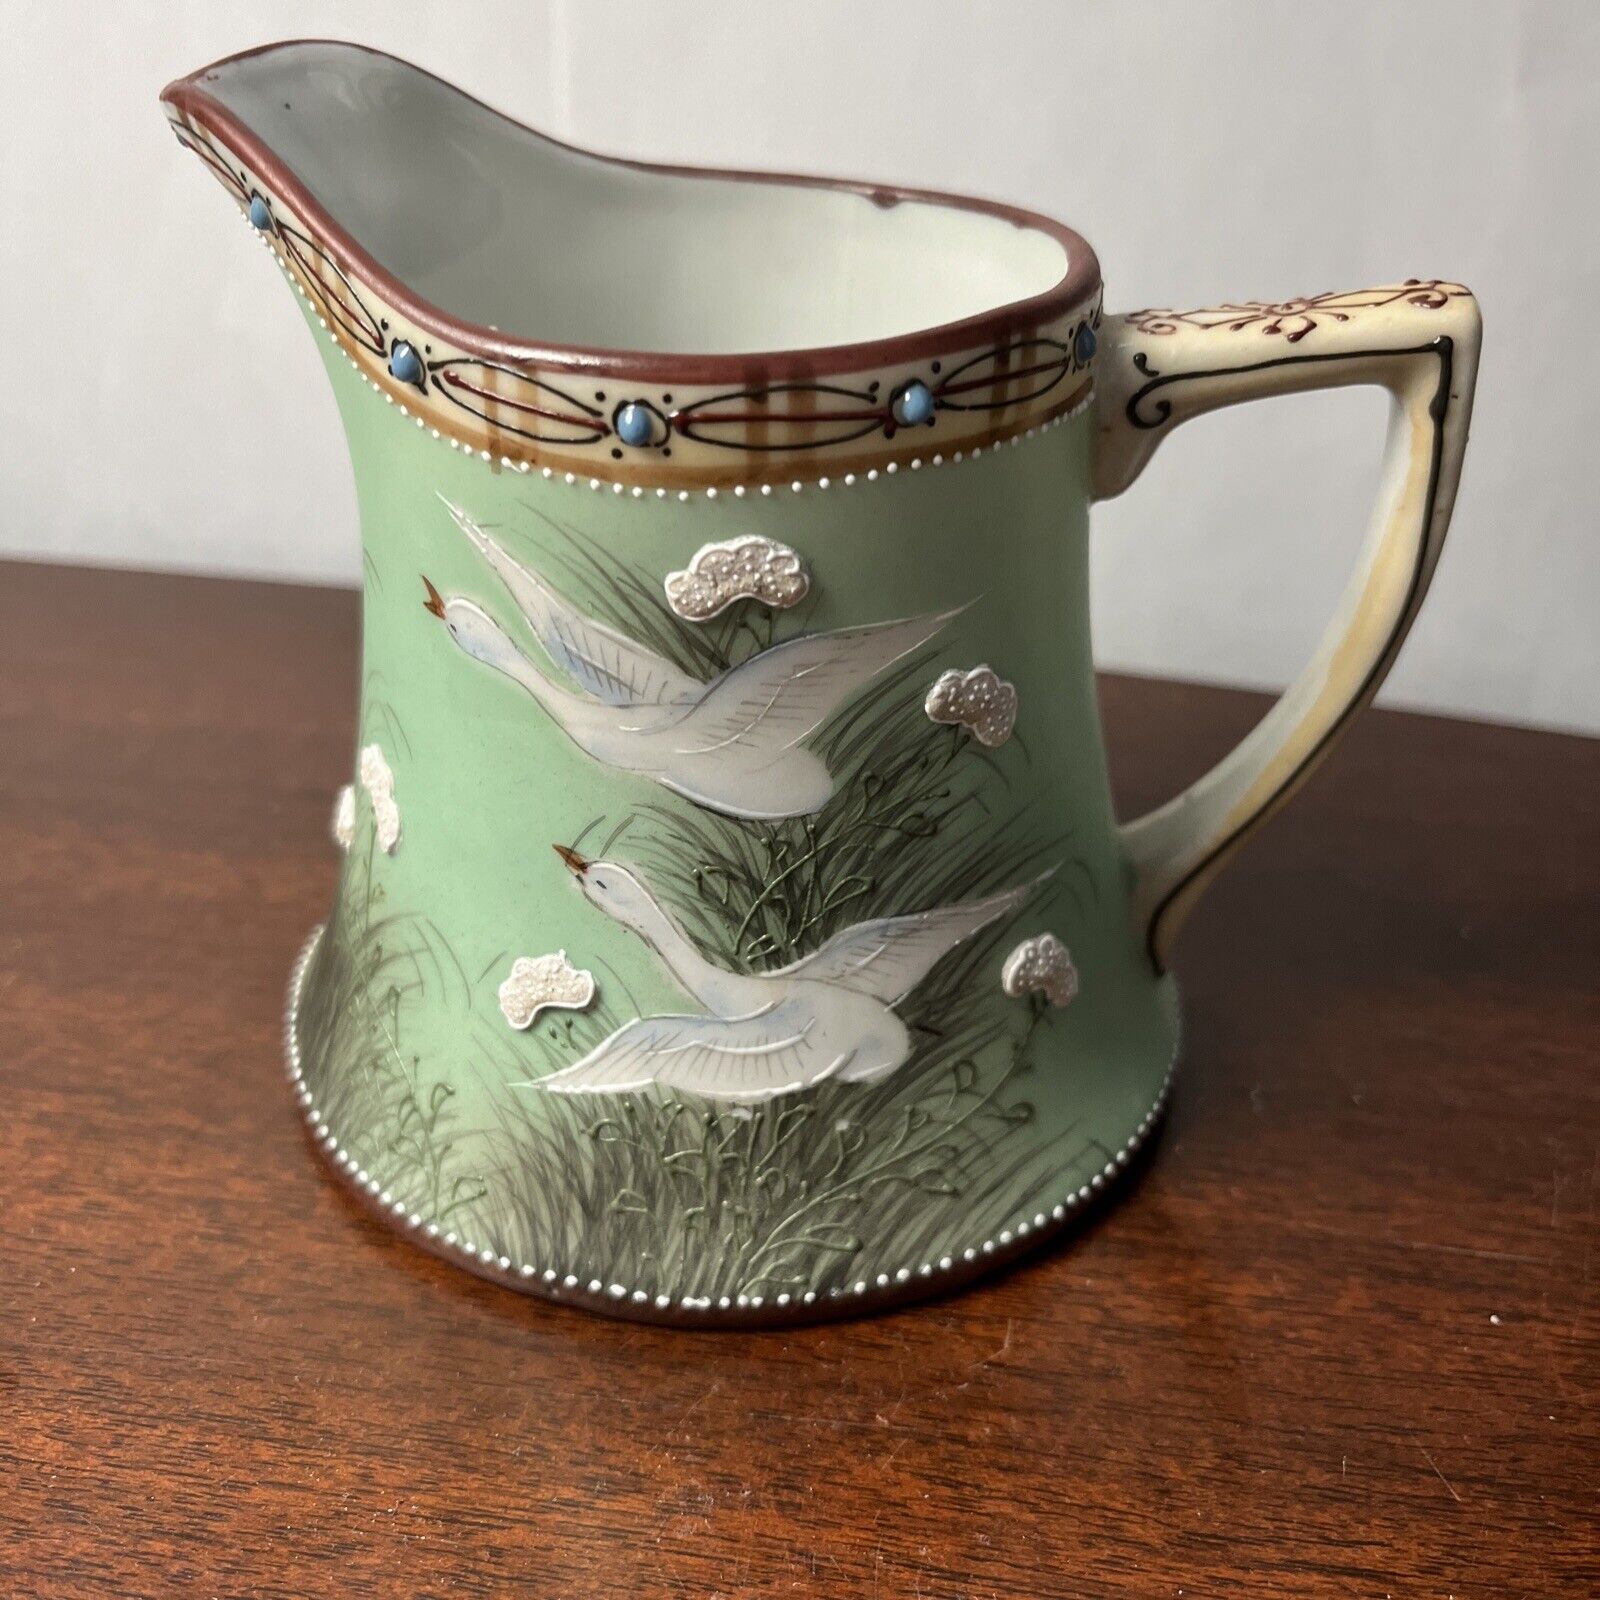 Rare Handpainted Antique Japanese Pitcher With Raised Paint Finish